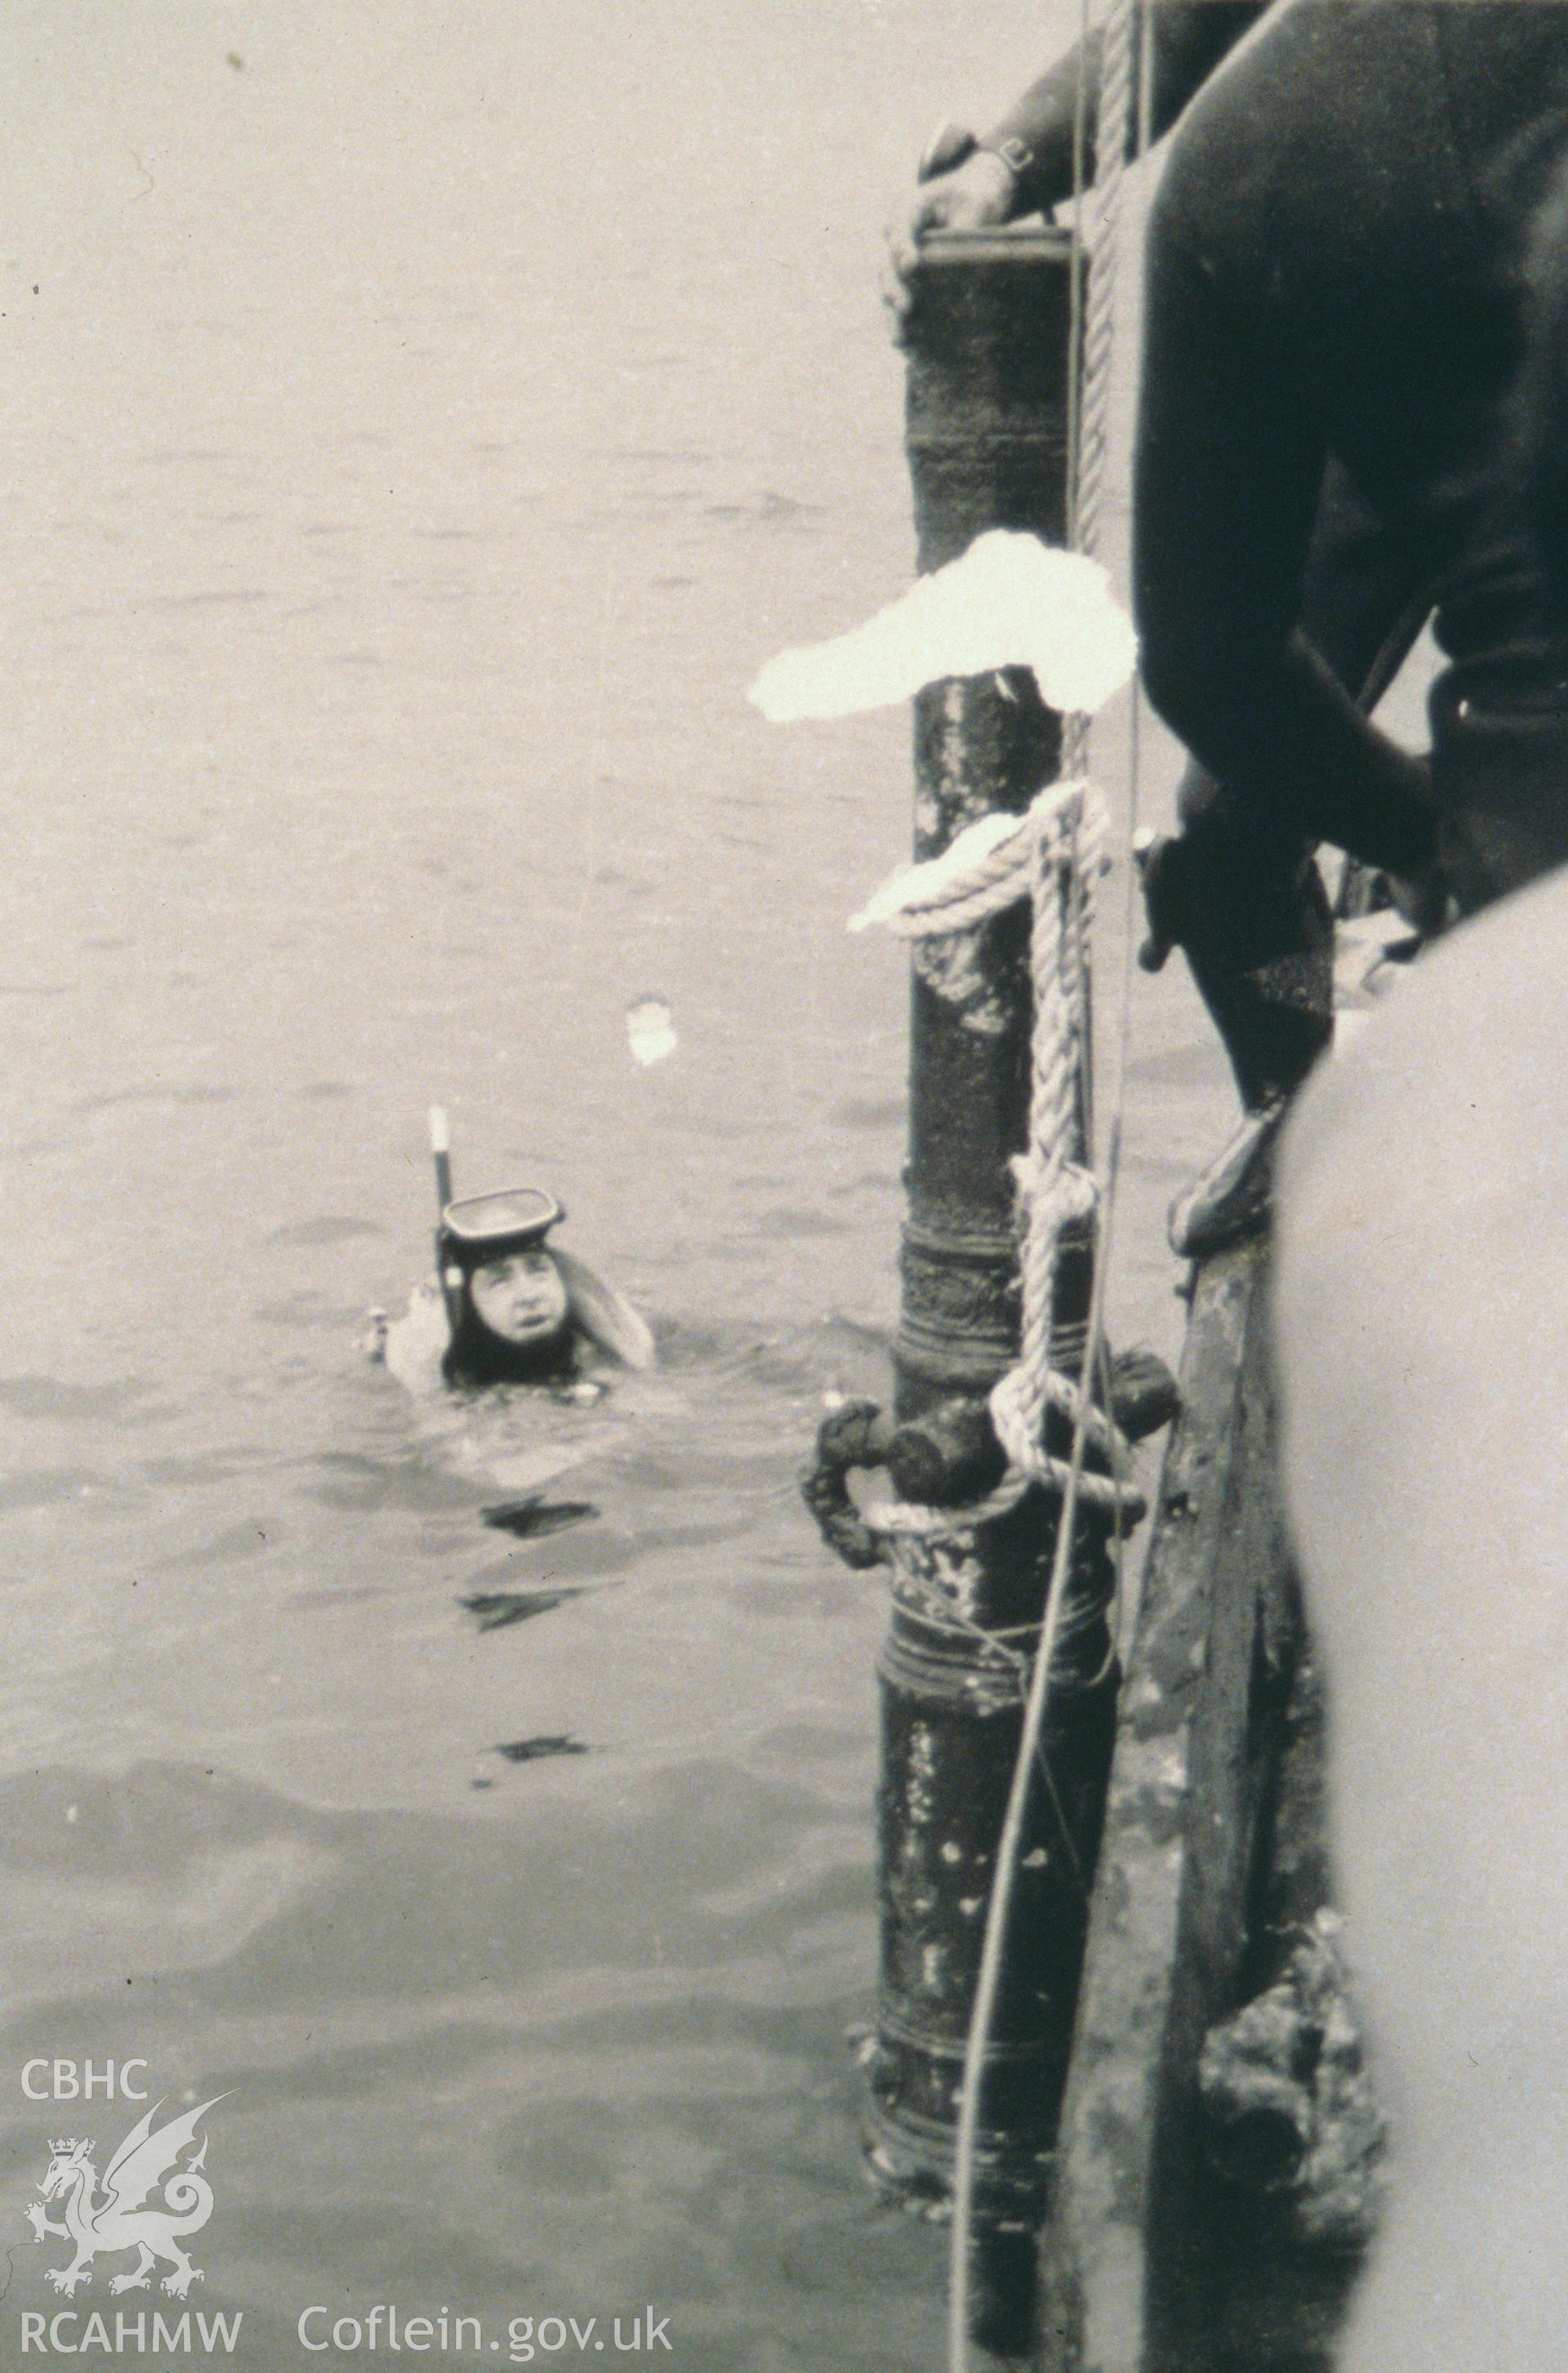 Colour slide of a diver surfacing, from a survey of the Mary designated shipwreck, courtesy of National Museums, Liverpool (Merseyside Maritime Museum)